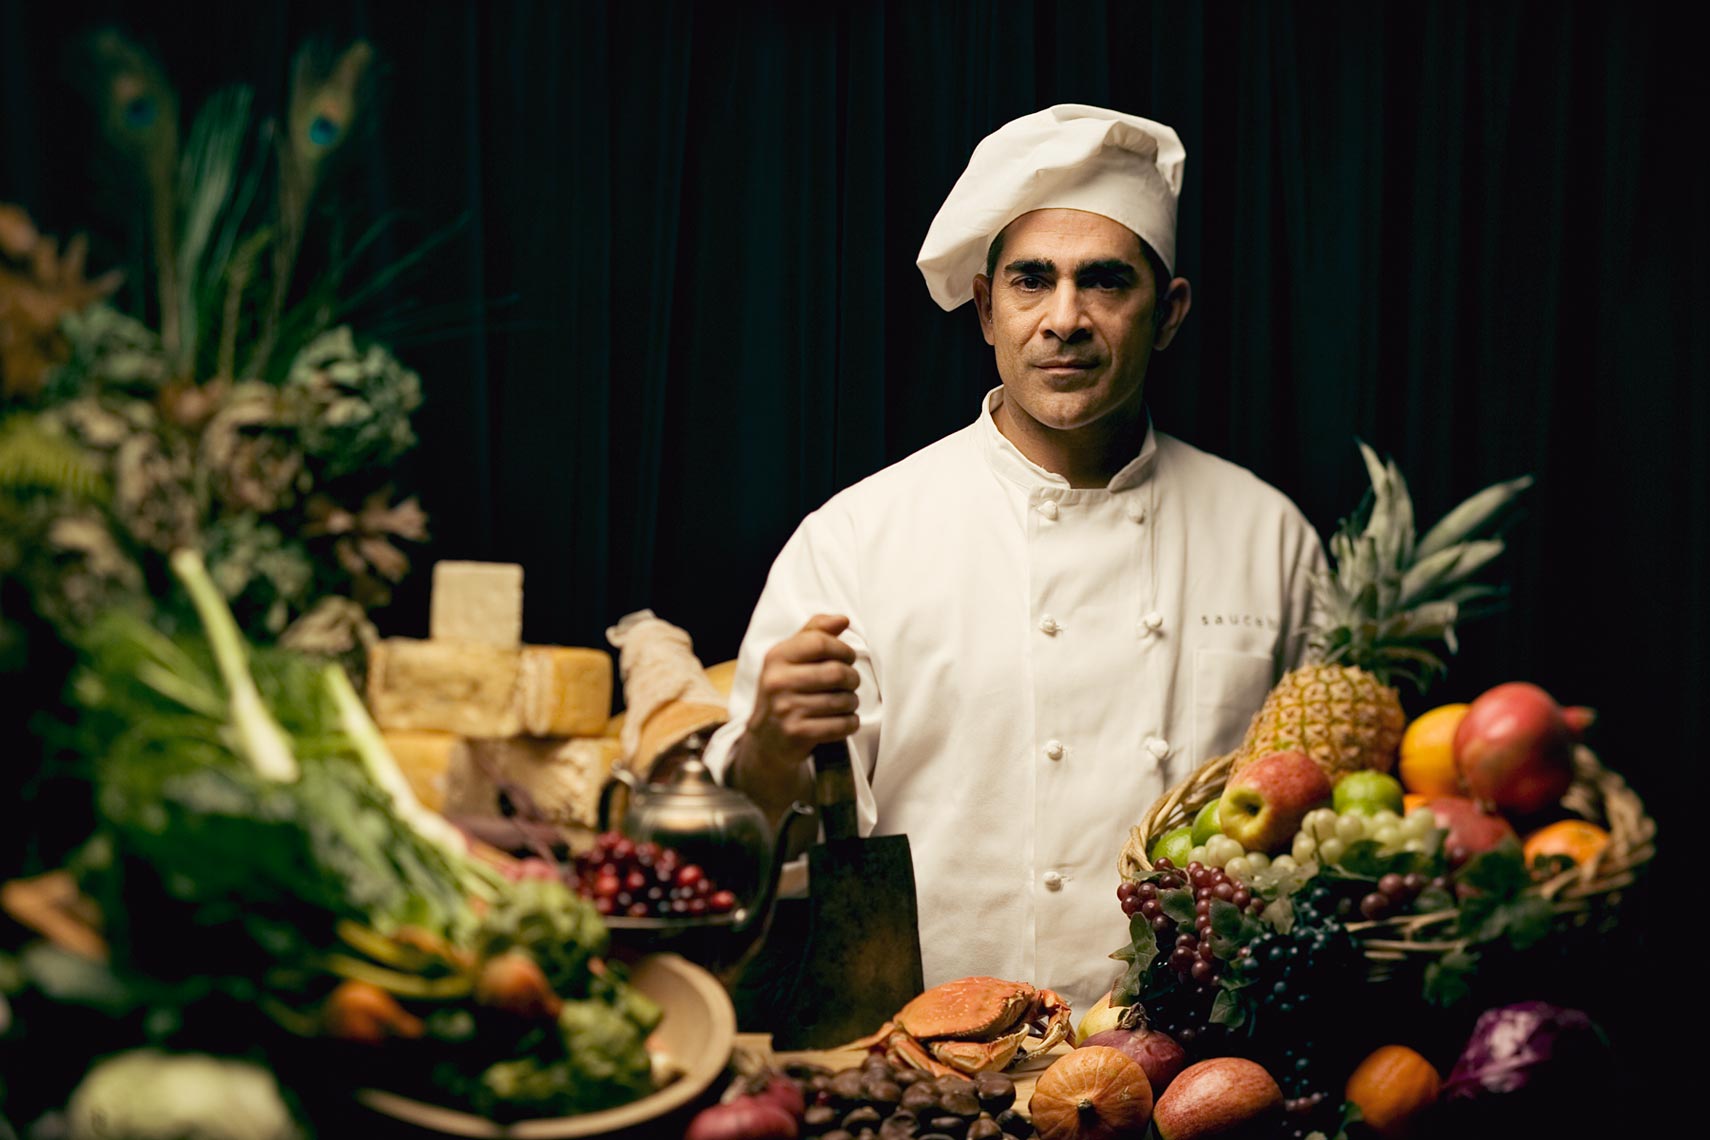 Portrait of chief surrounded by fruit and vegetables with a black background.